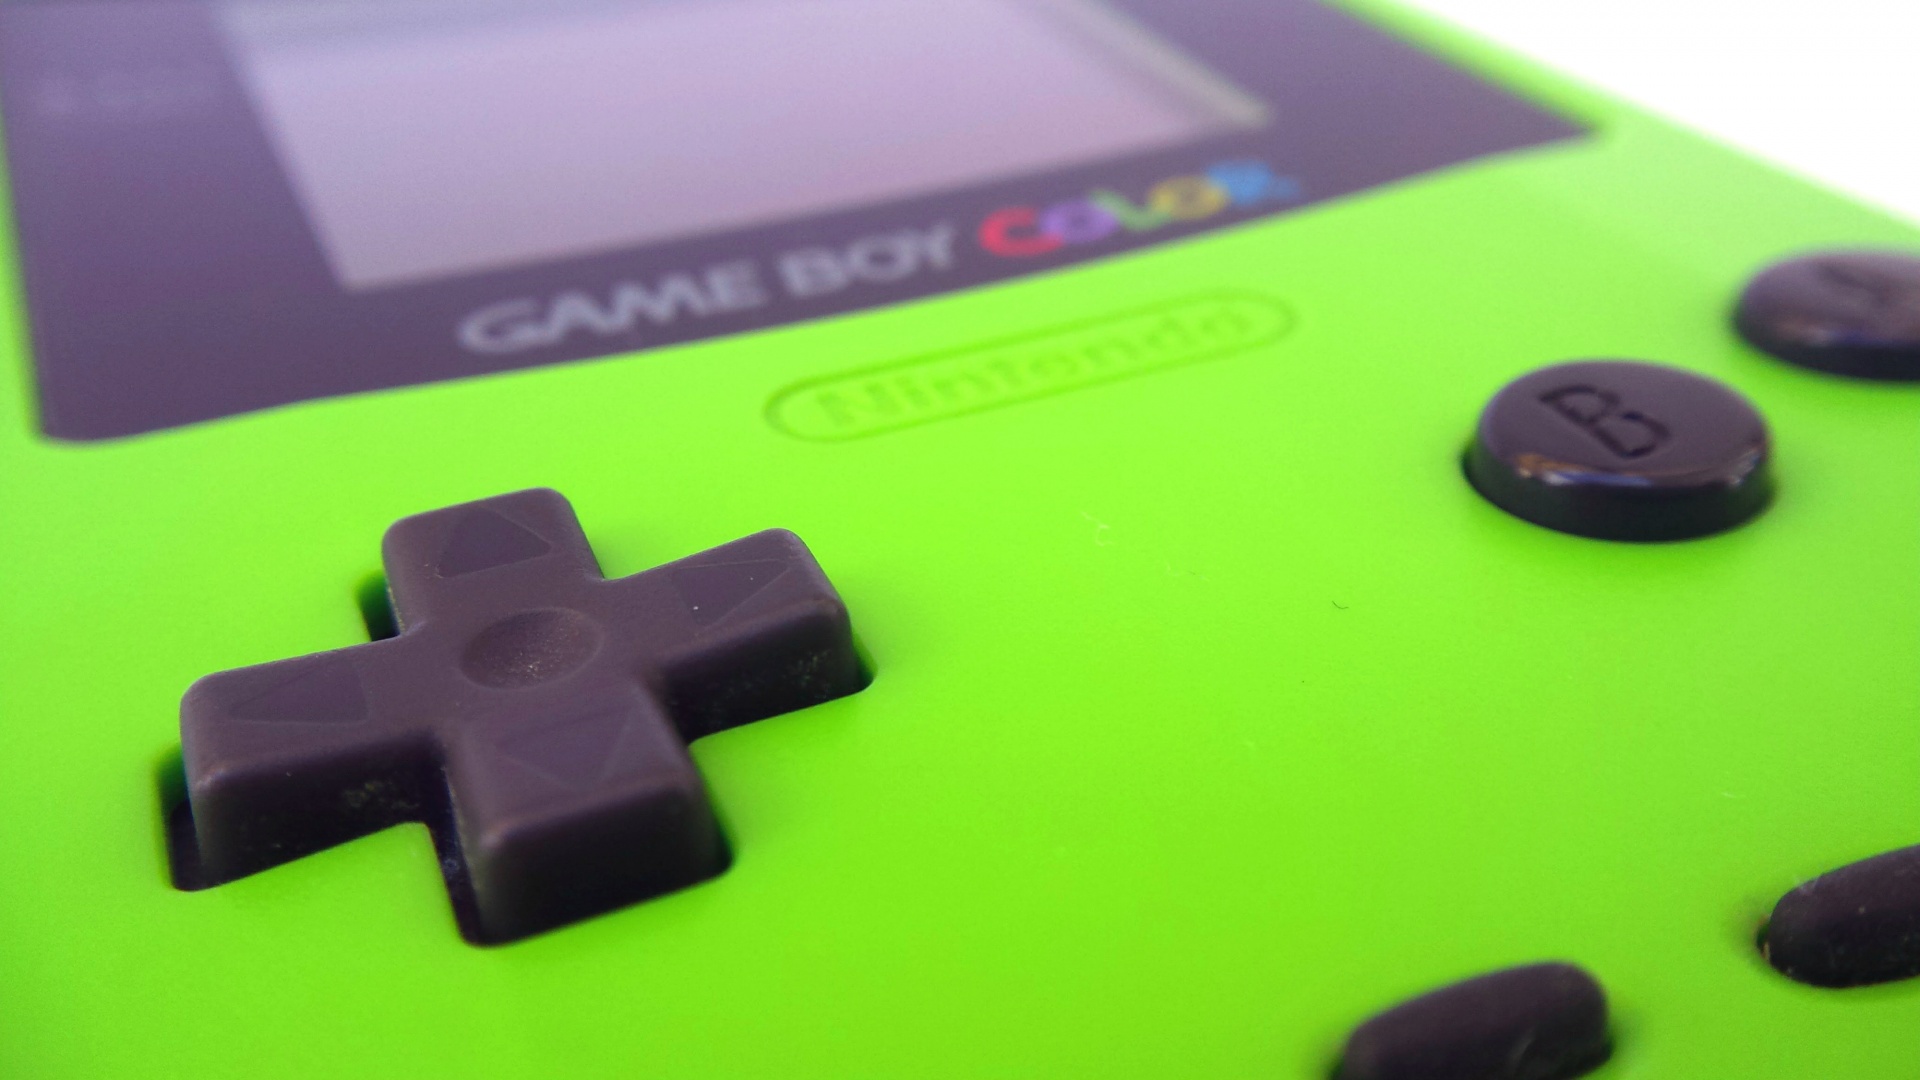 Close-up of a green Nintendo Game boy Color, focused on the D-pad controls